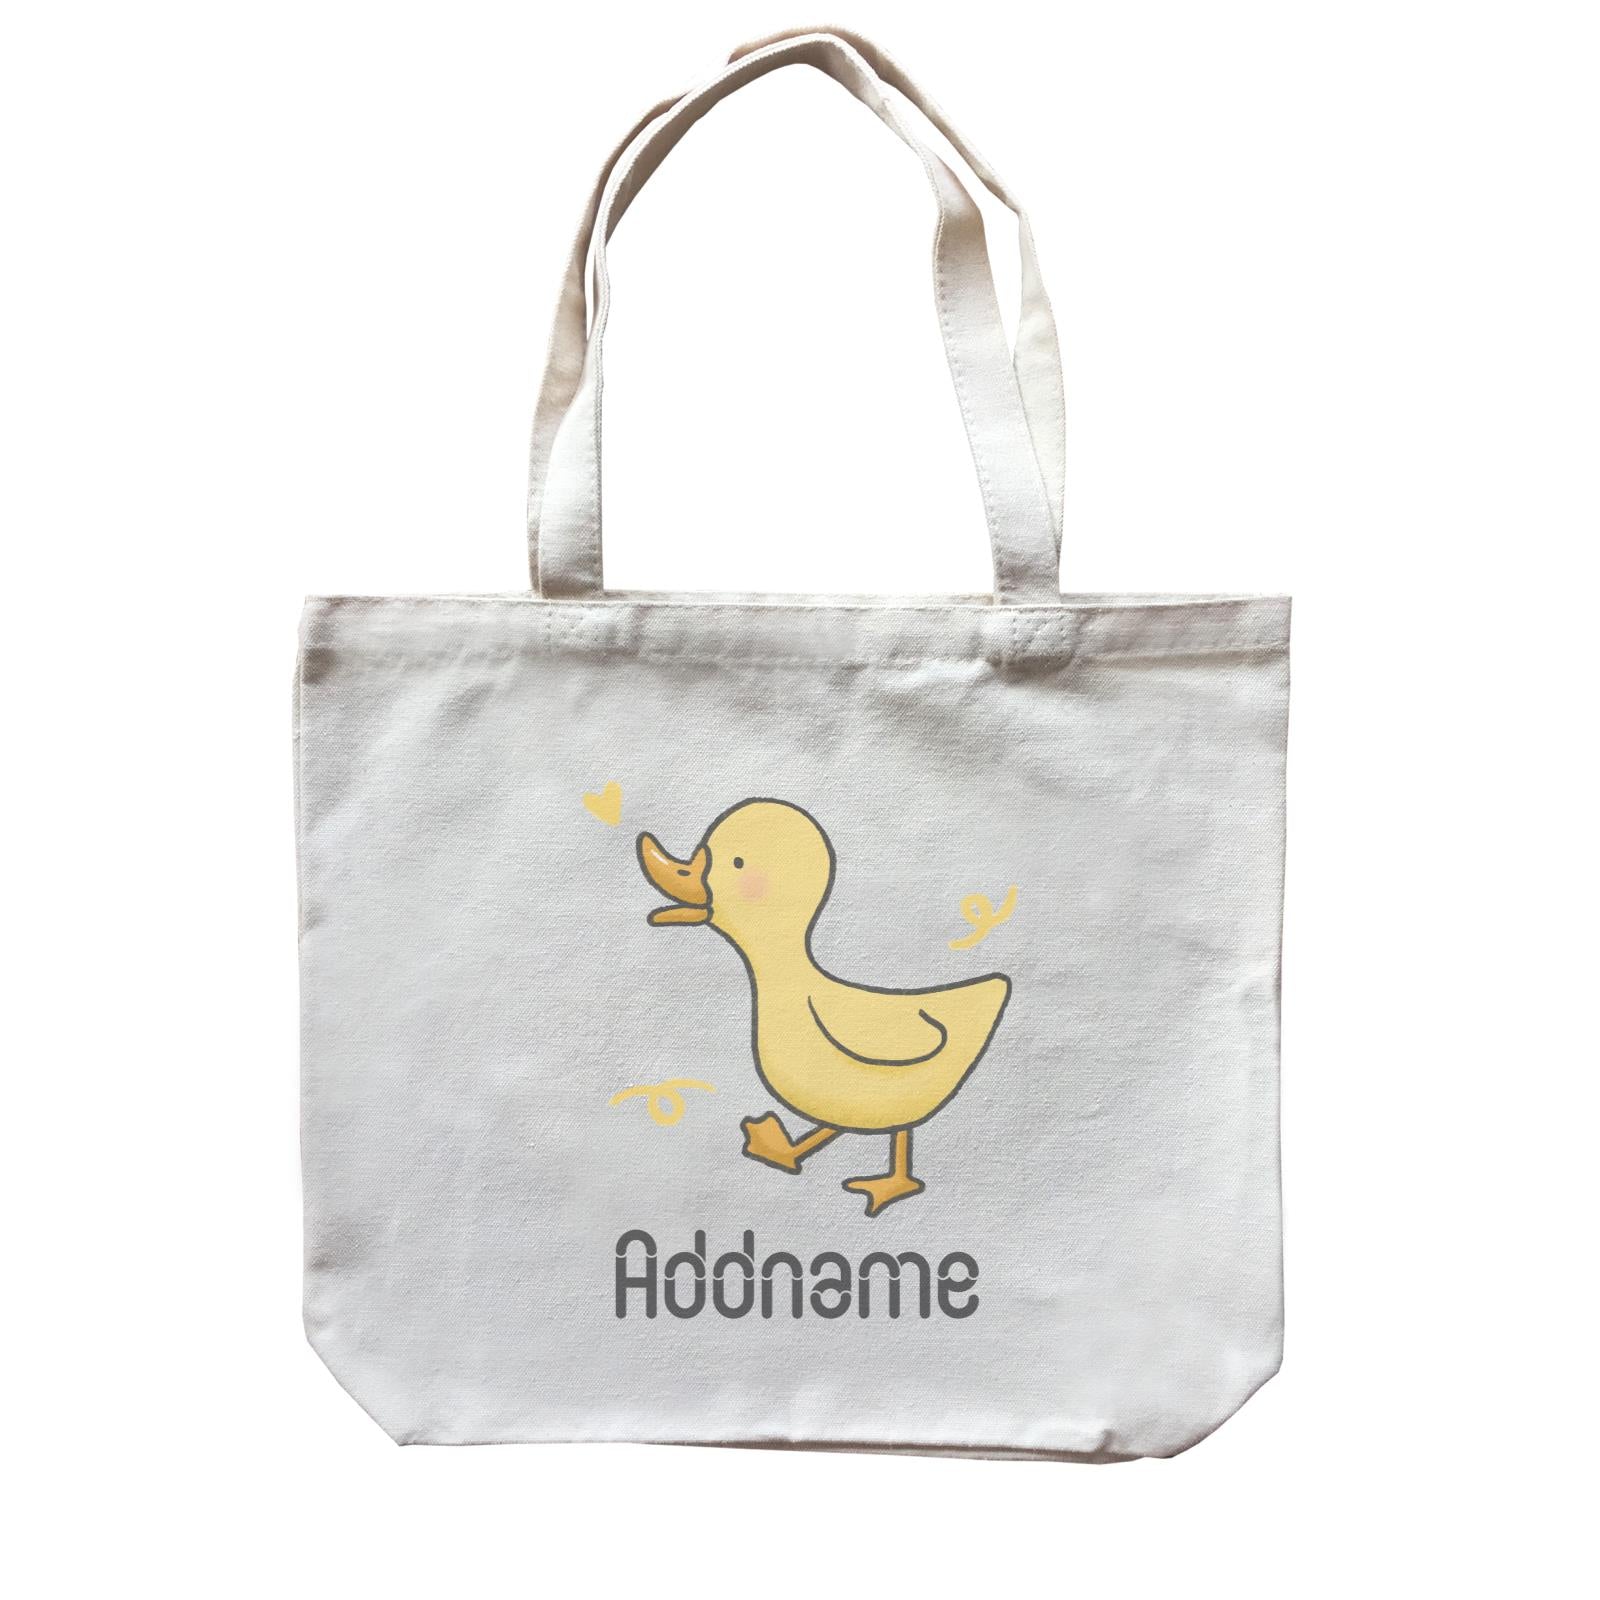 Cute Hand Drawn Style Duck Addname Canvas Bag